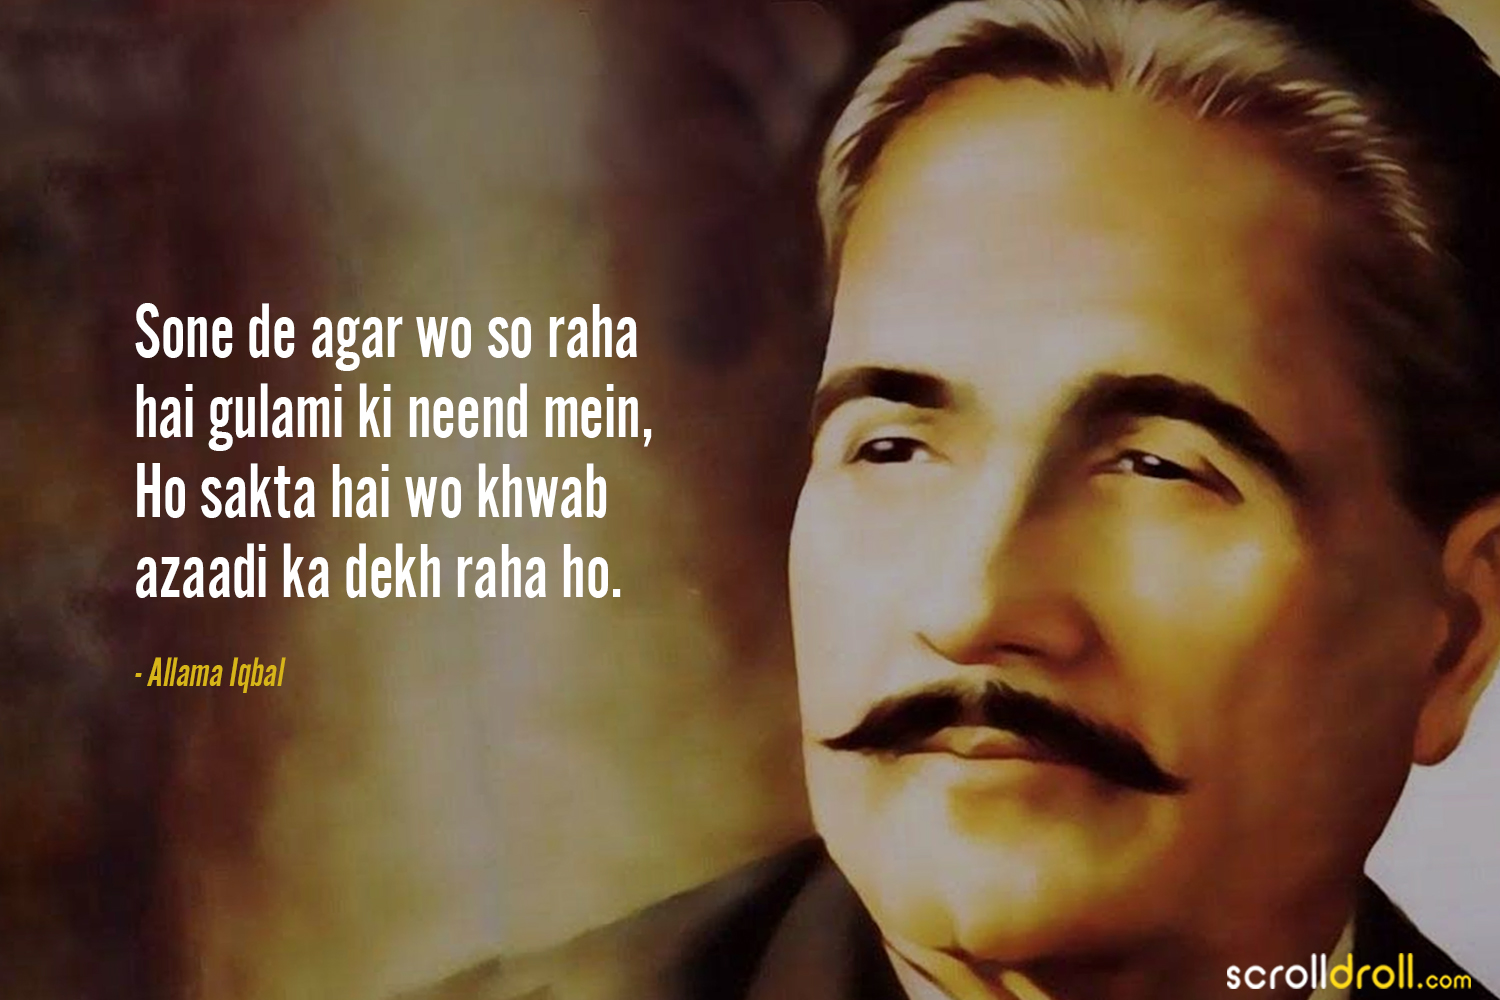 Shayaris-By-Allama-Iqbal-6 - The Best of Indian Pop Culture ...